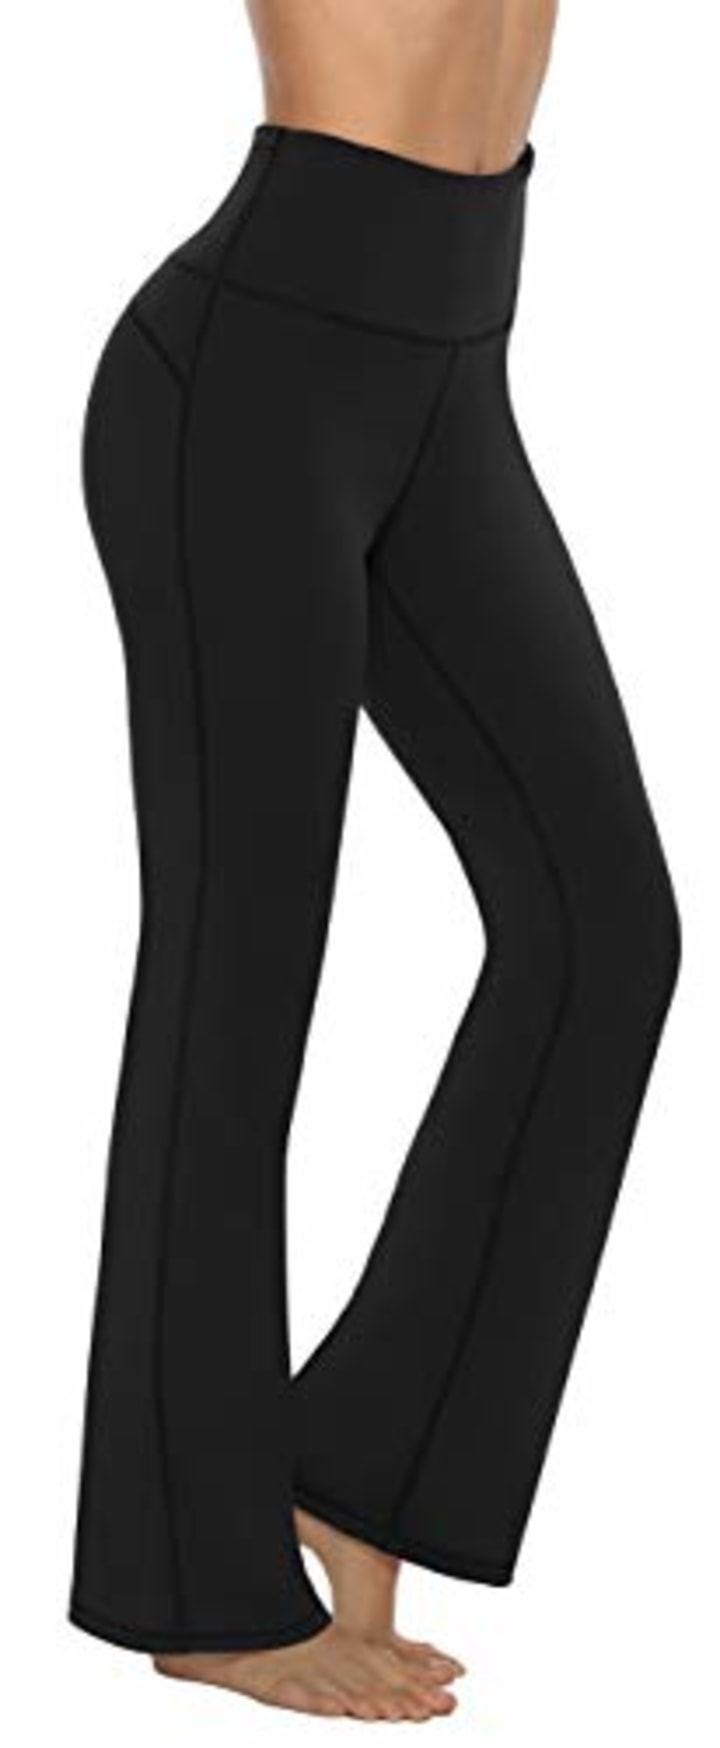 AFITNE Yoga Pants for Women Bootcut Pants with Pockets High Waisted Workout Bootleg Yoga Pants Tall Long Athletic Gym Pants Black - L